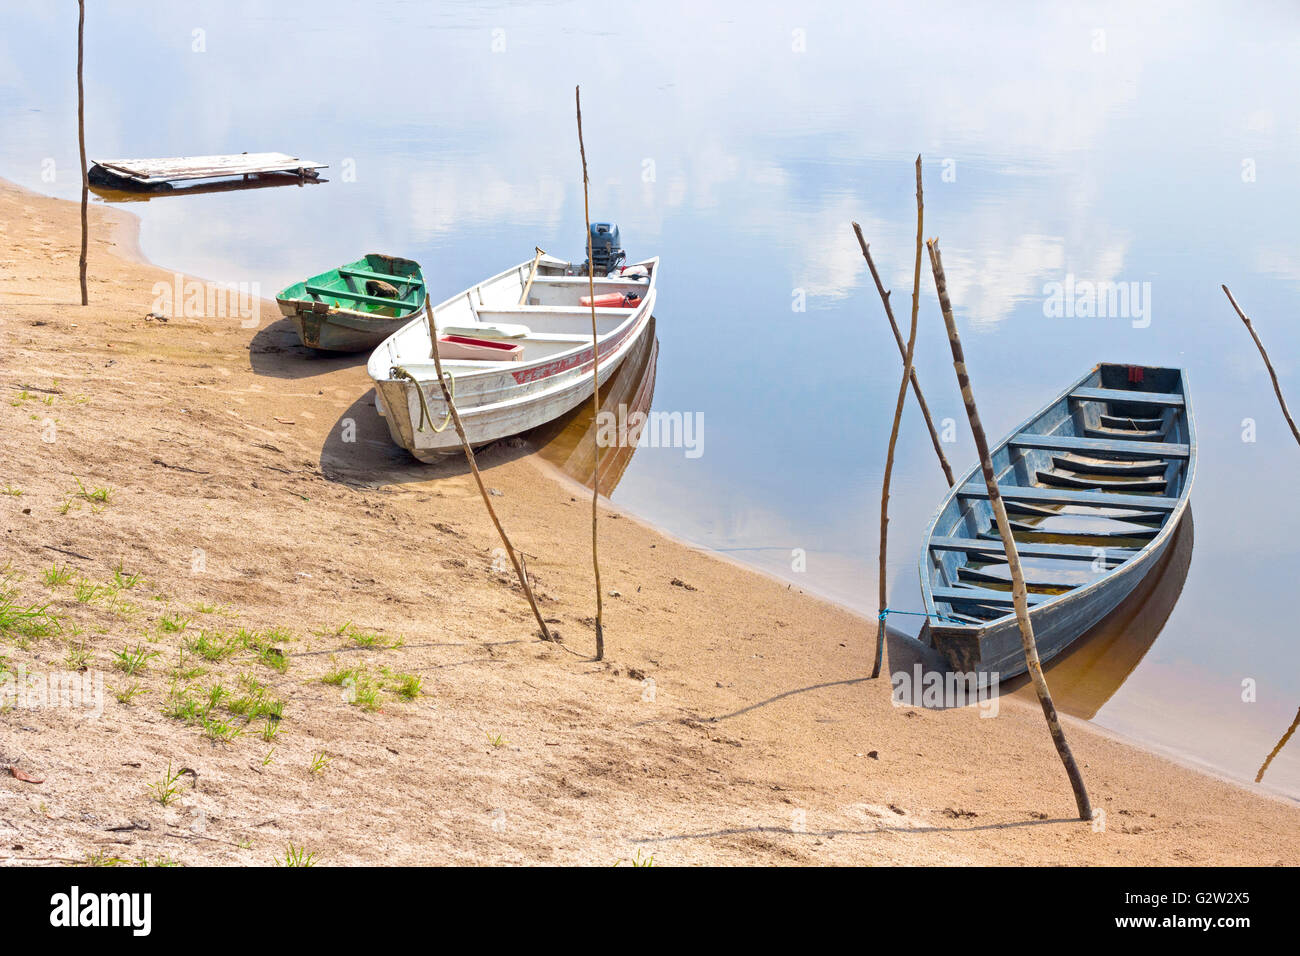 Old wooden boats moored to Amazon river shore in Brazil. The sky reflects on the water. Stock Photo